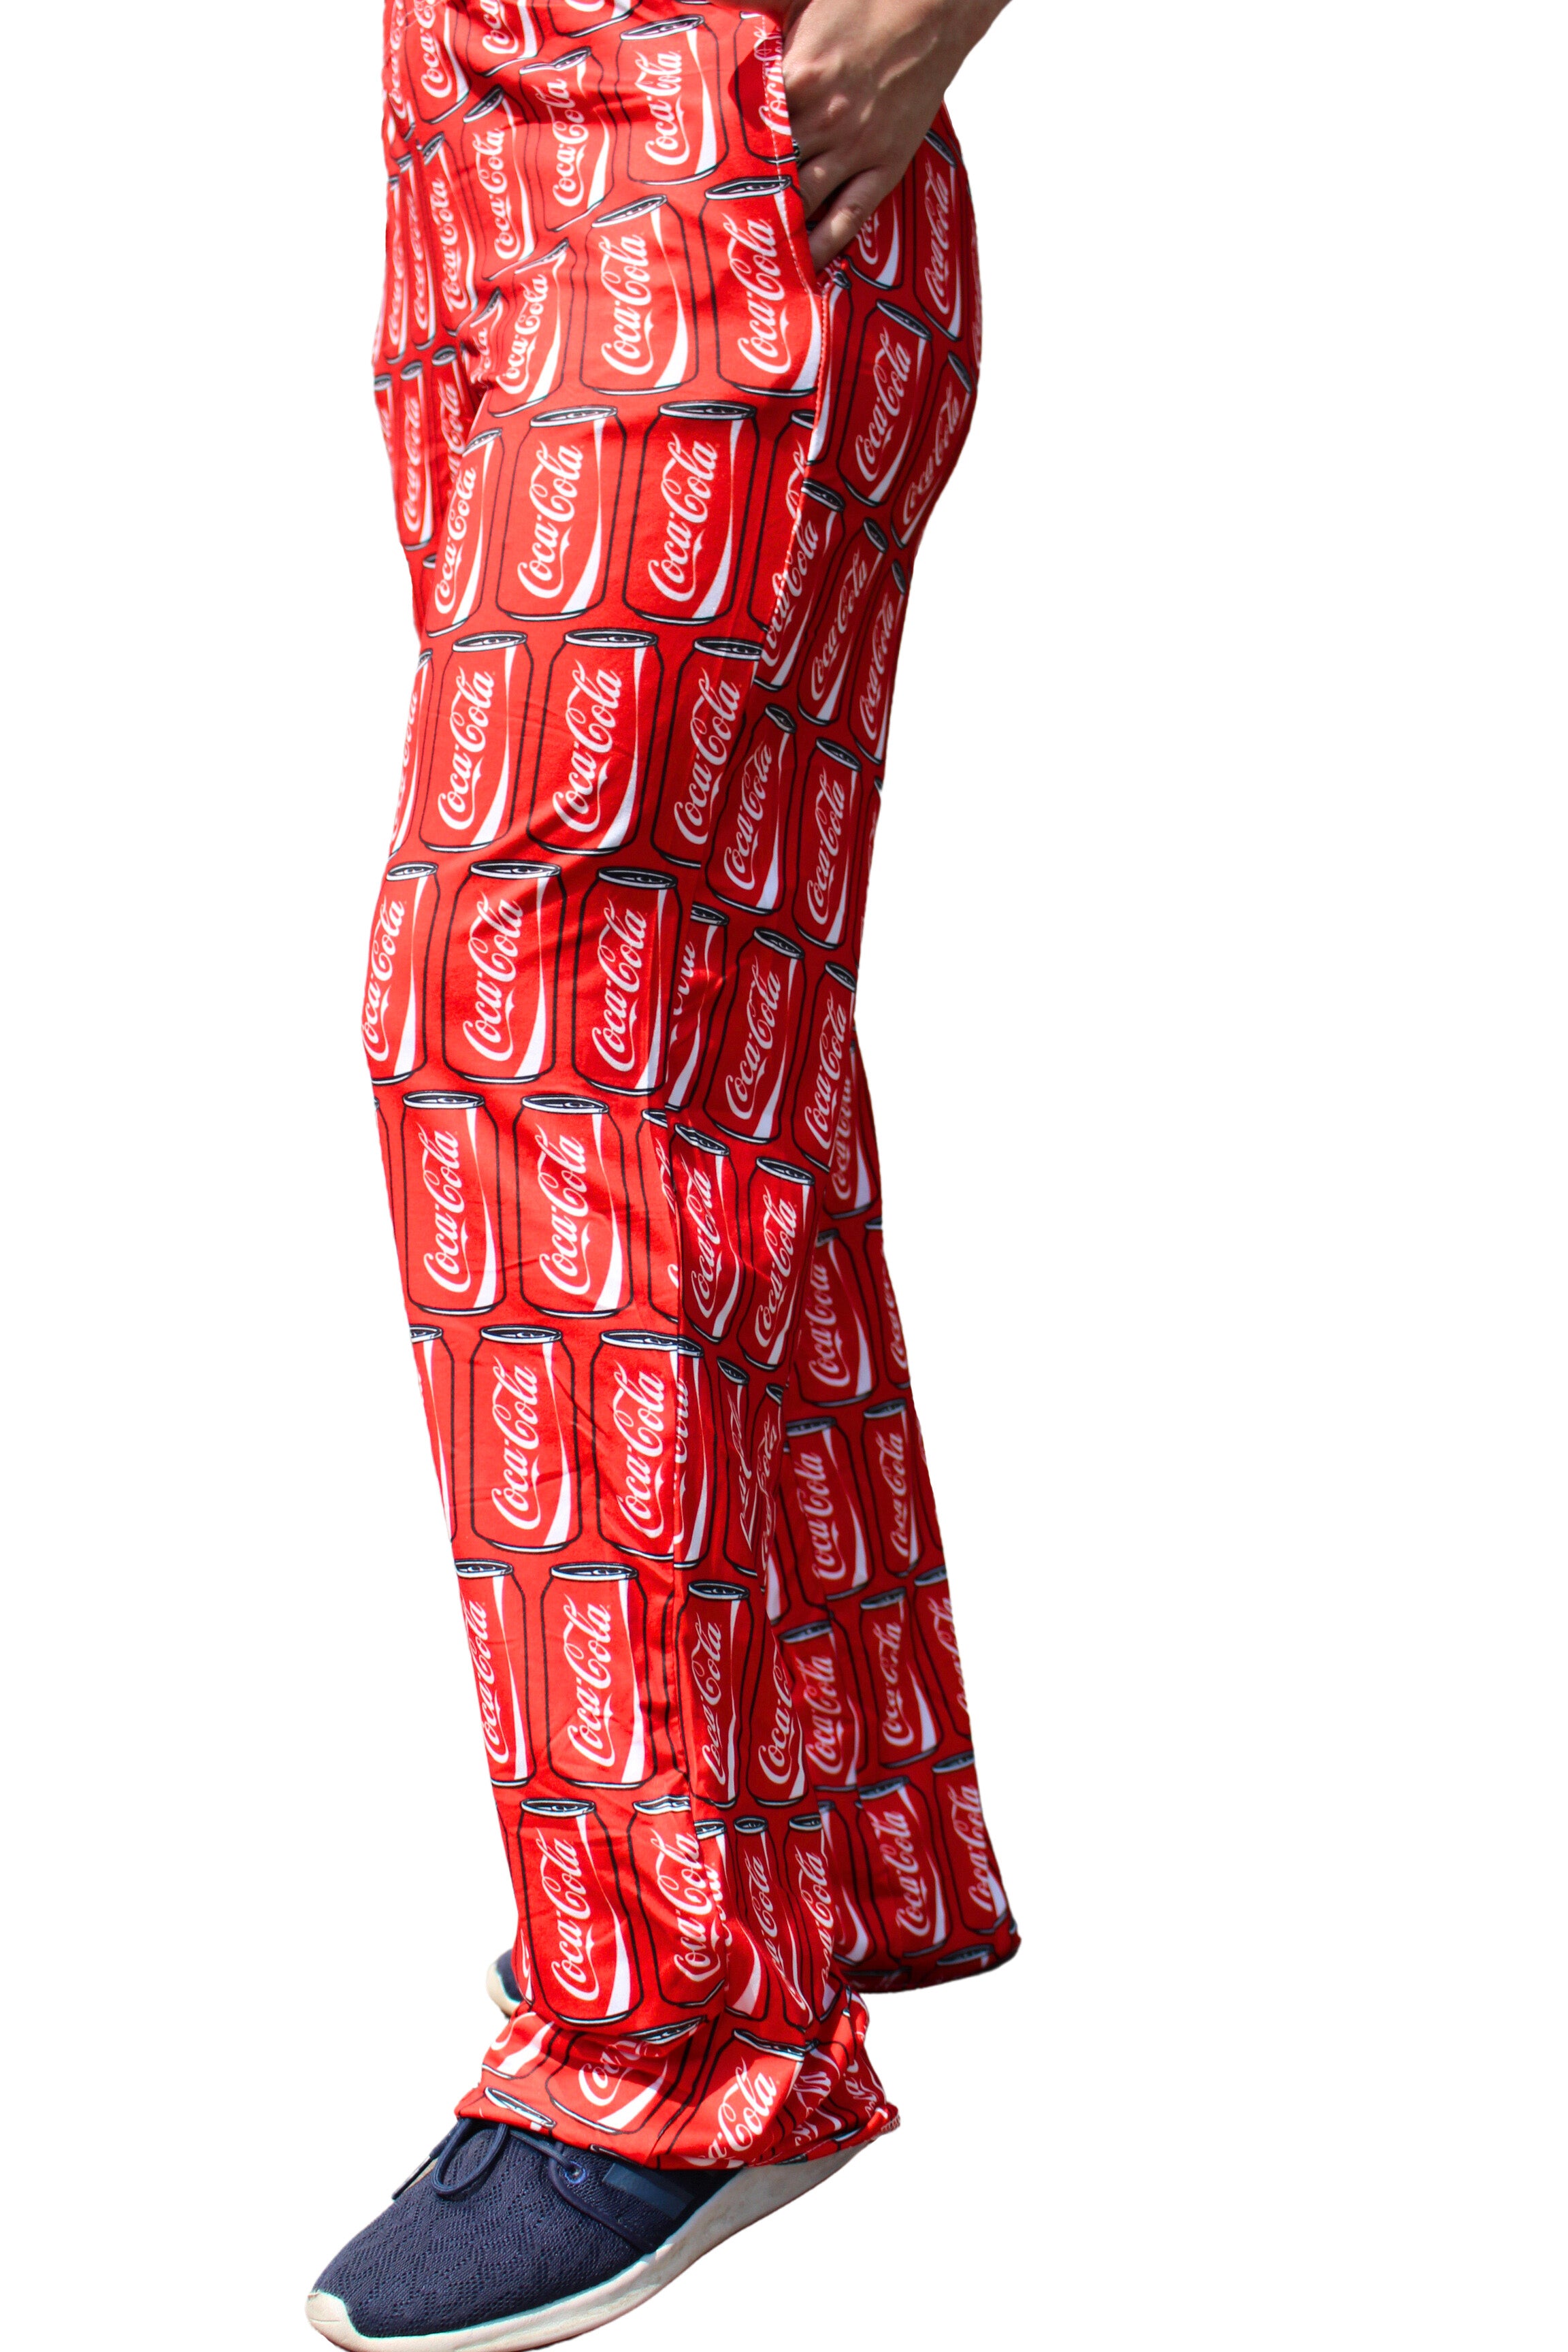 Coca-Cola Can Pattern Pajama Lounge Pants on model left side view